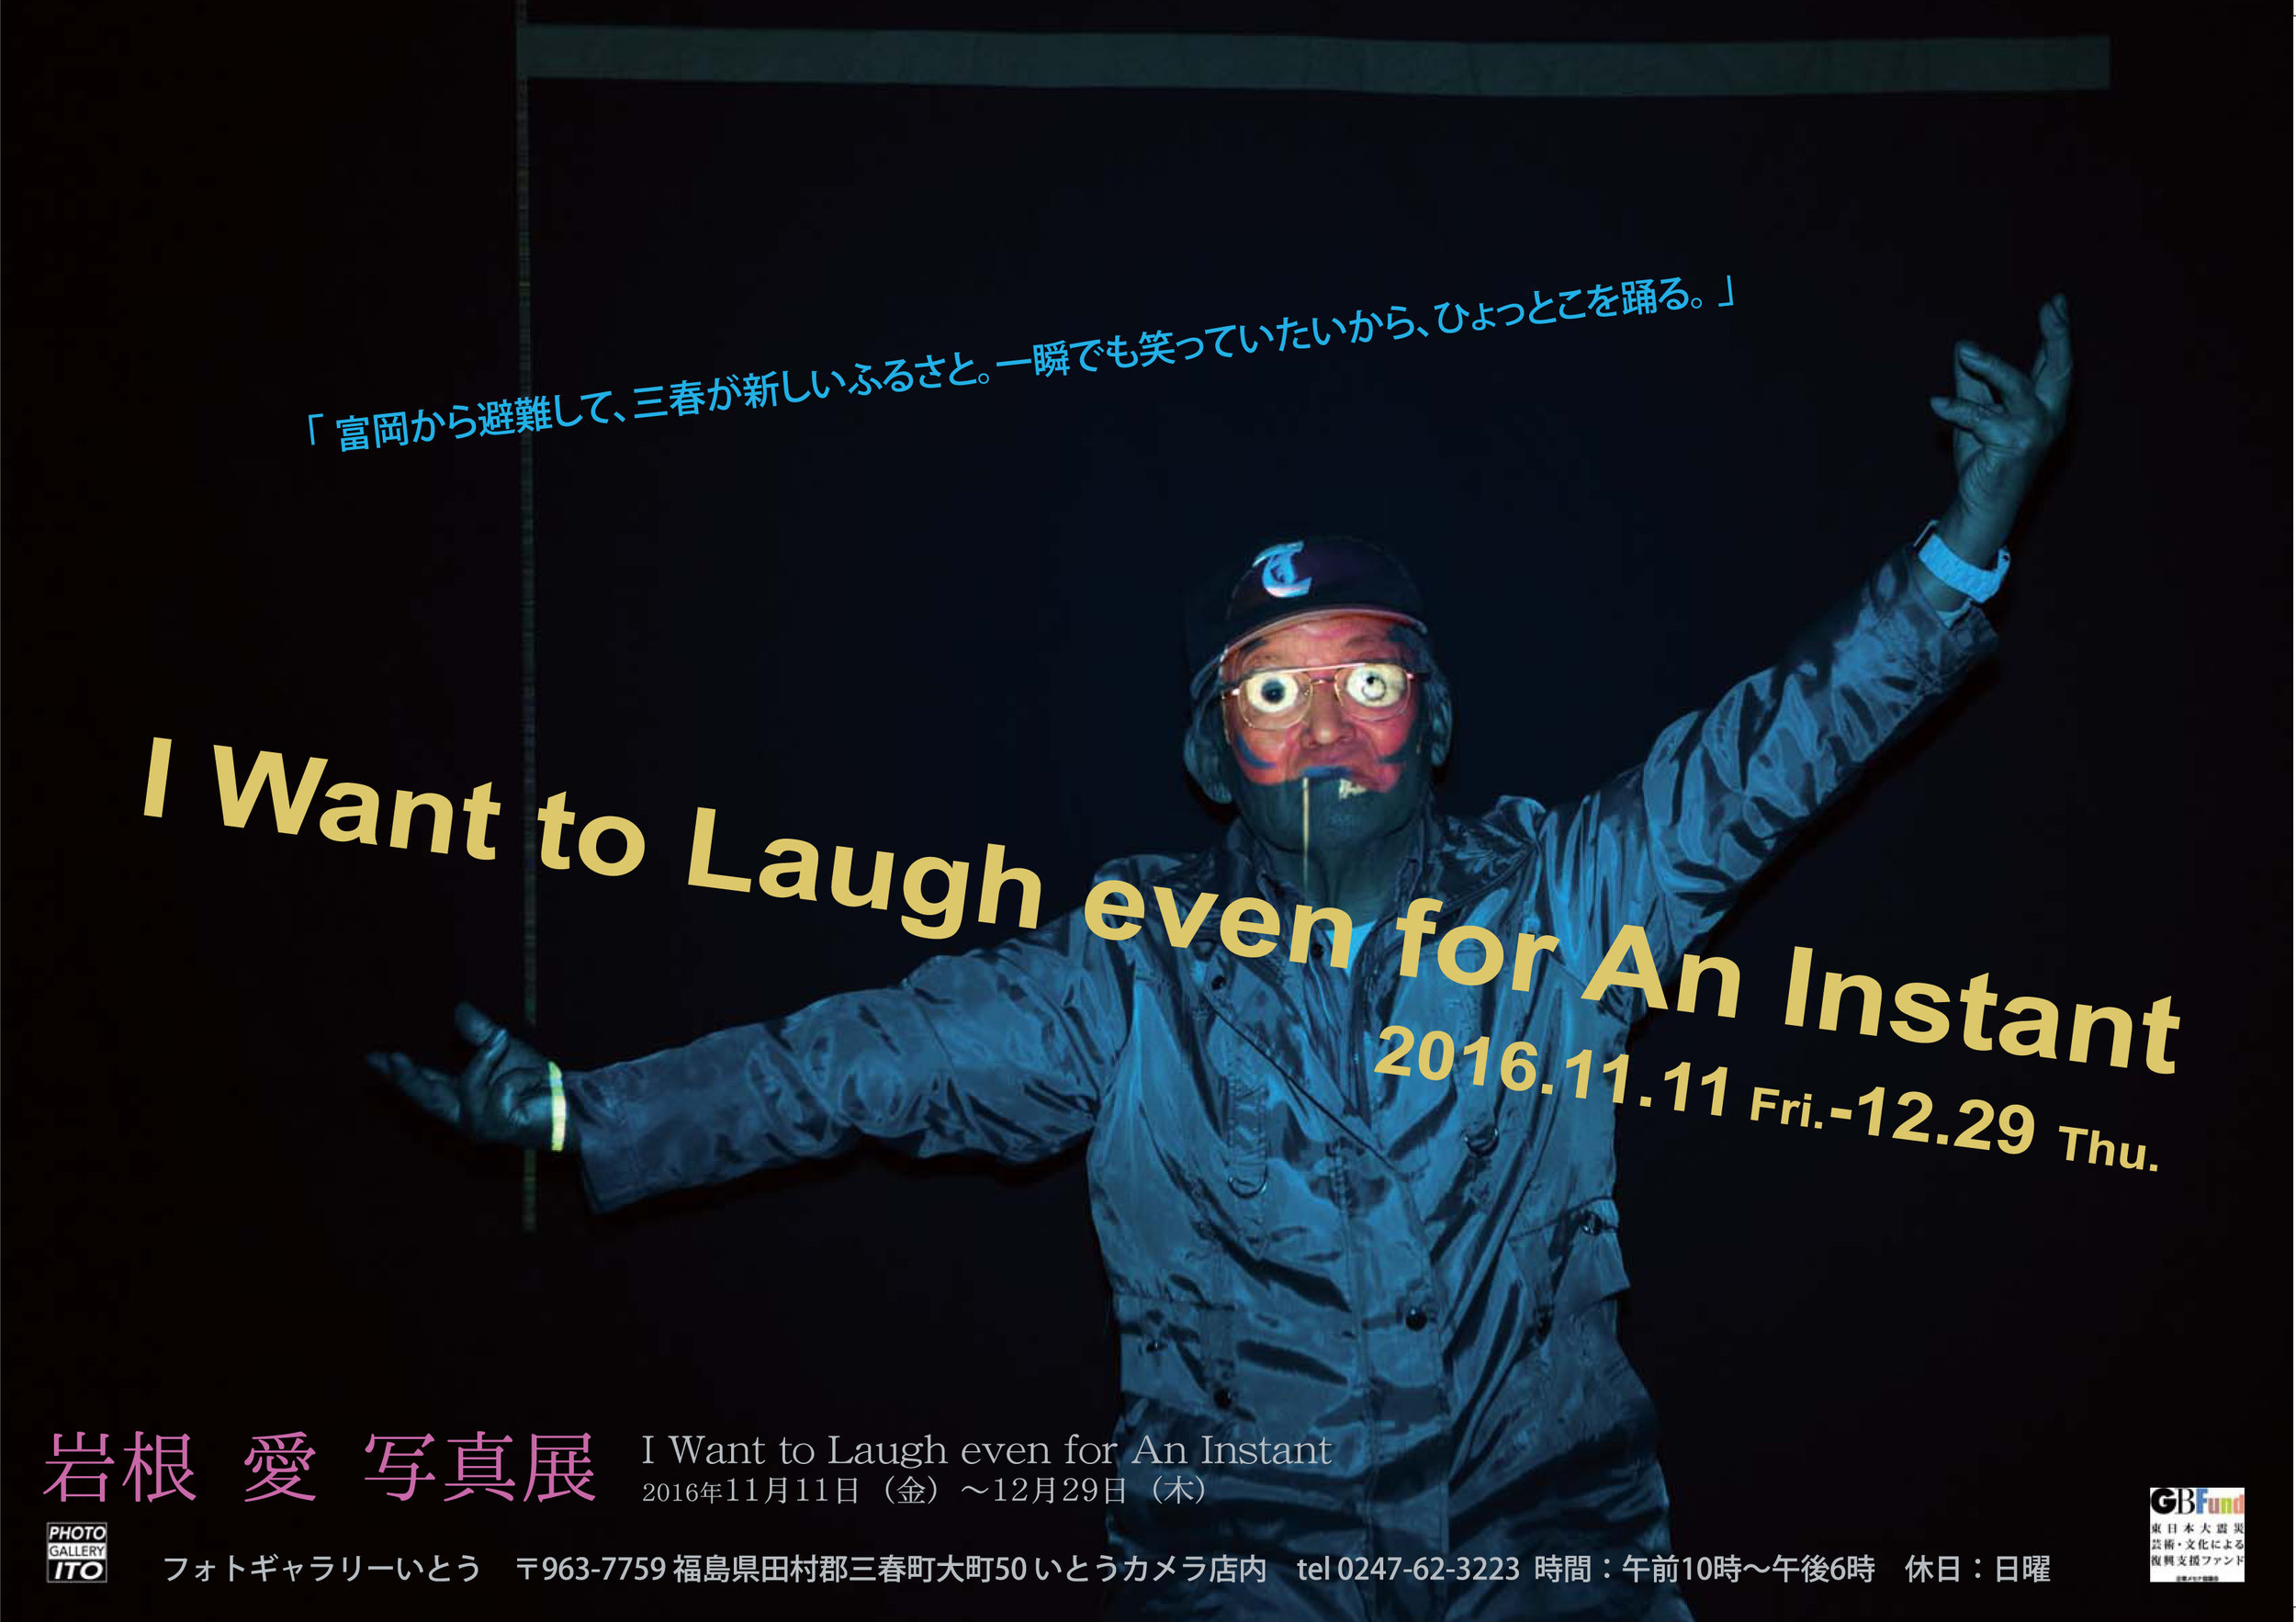  I Want to Laugh even for An Instant  2016.11.11-12.29  Photo Gallery Ito  Miharu, Fukushima    